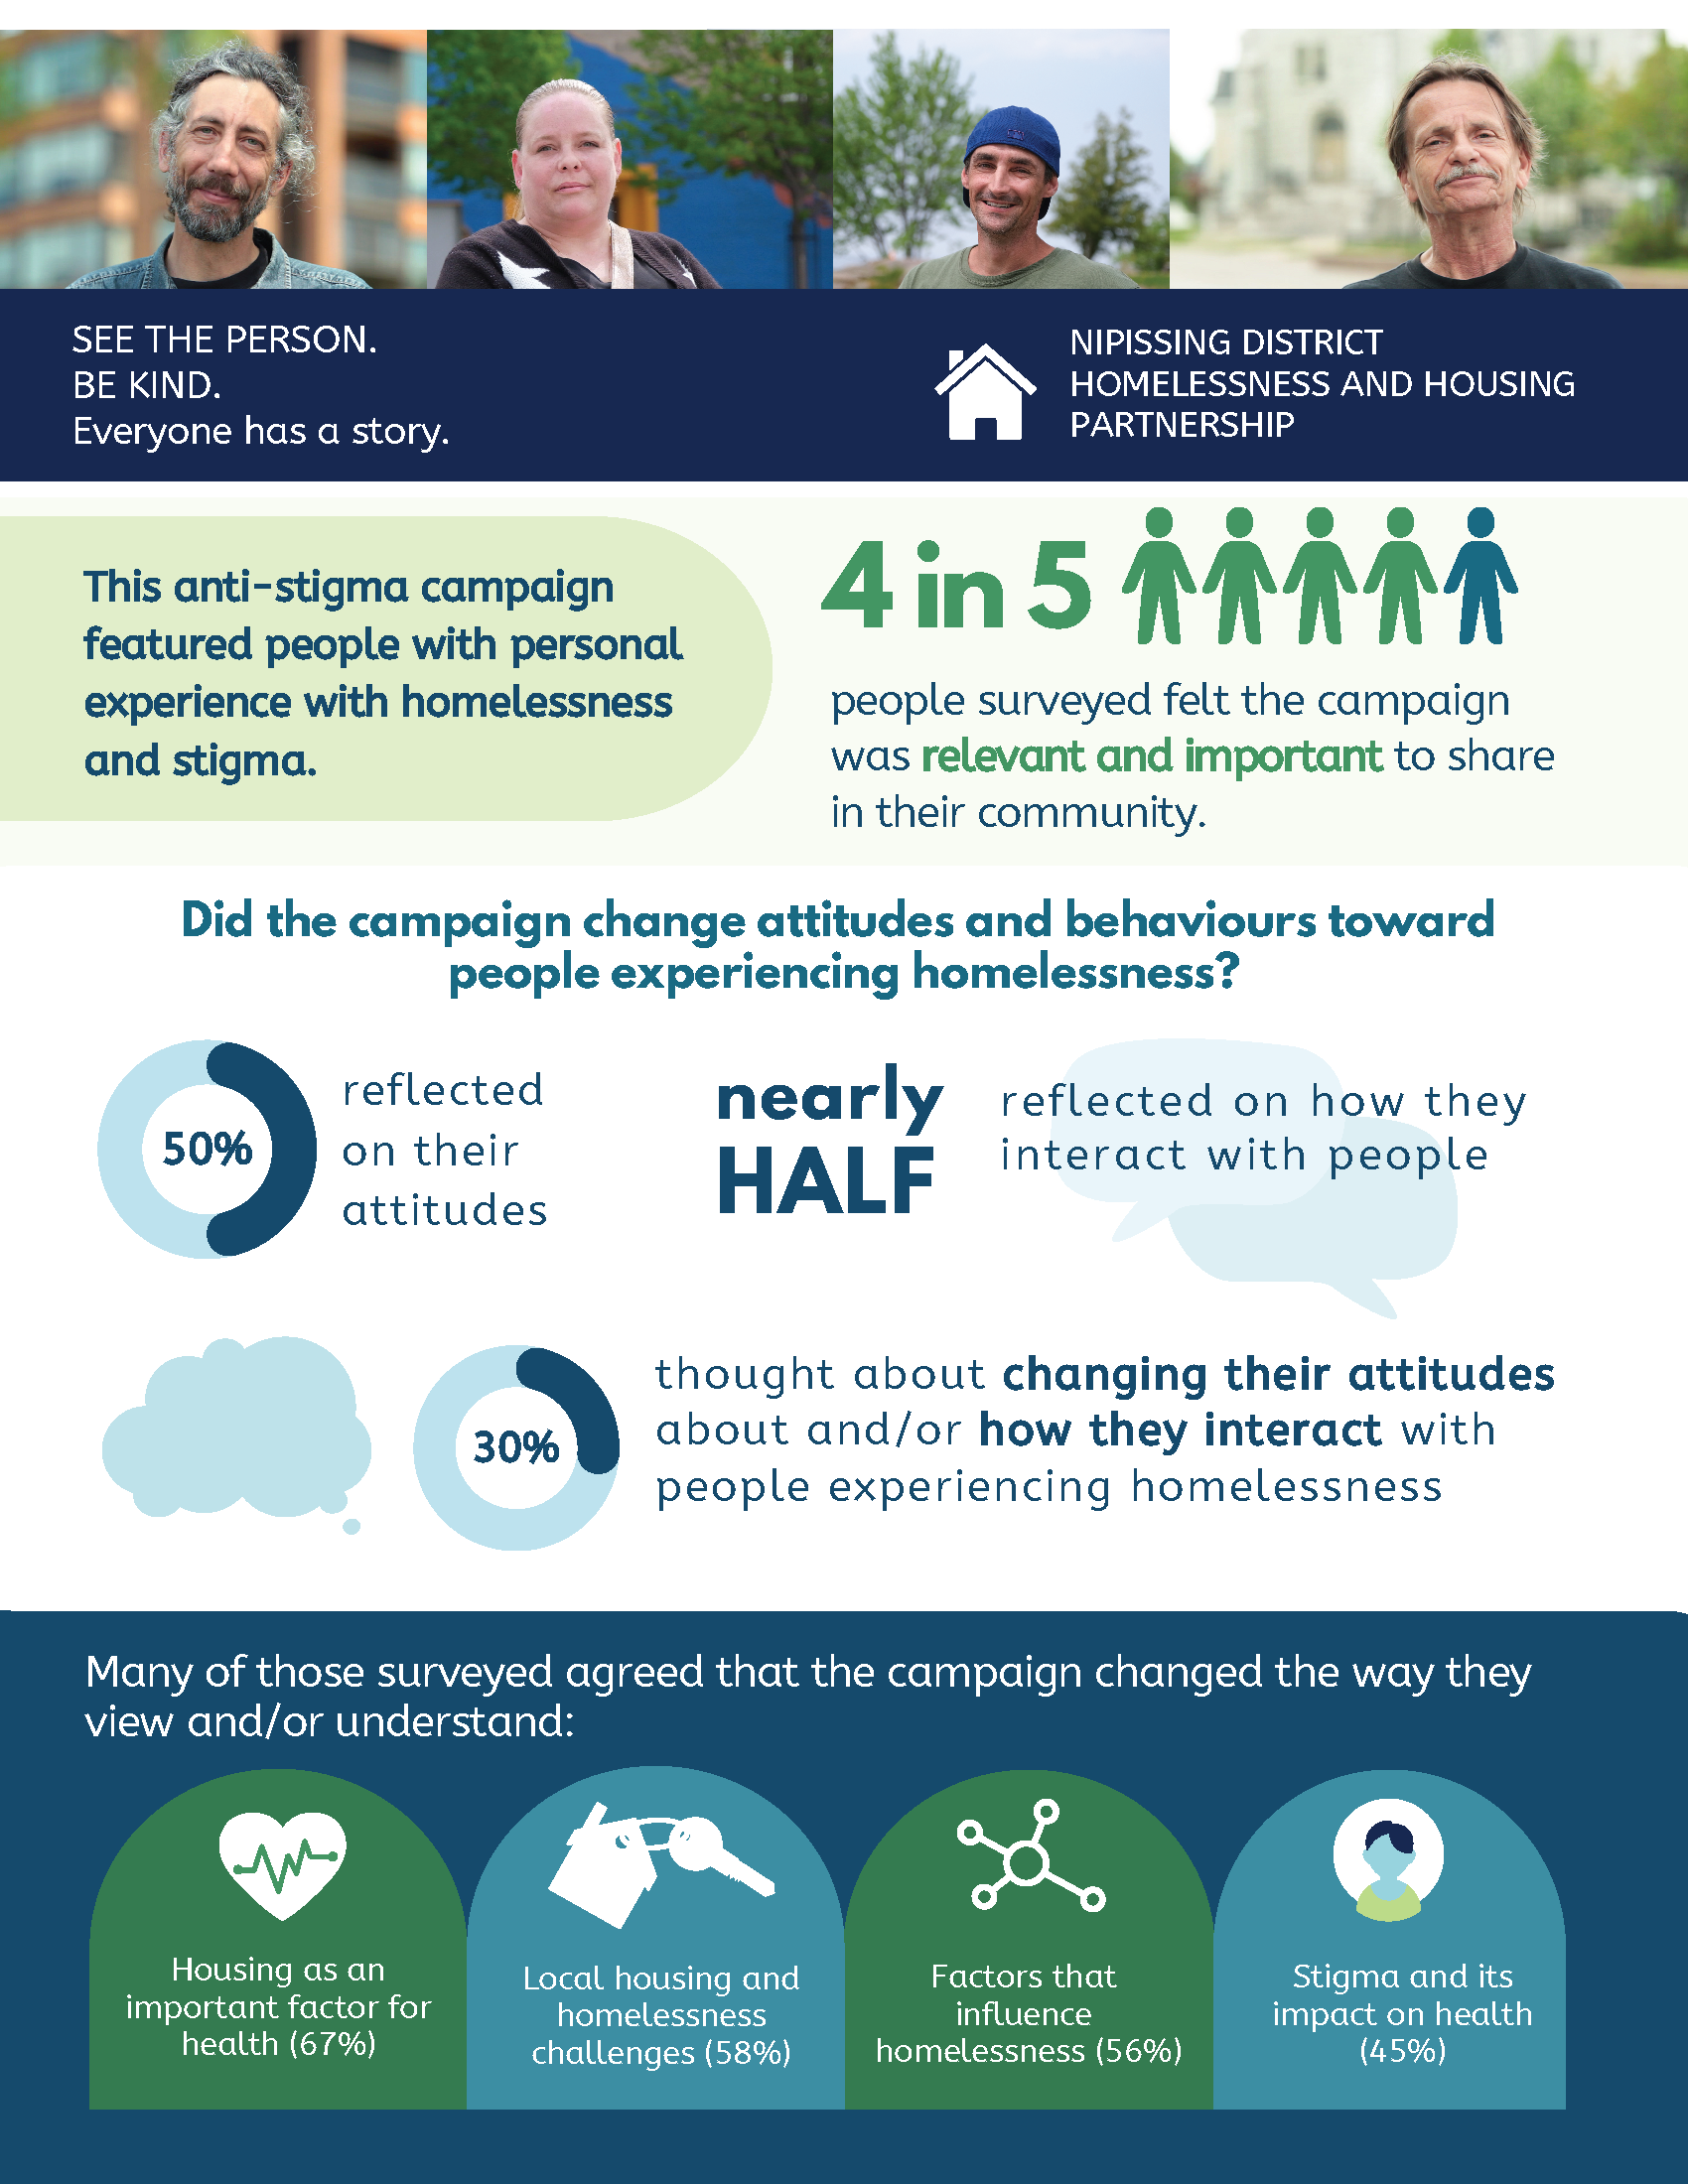 Infographic summarizing the evaluation results of the 2021 See The Person Campaign